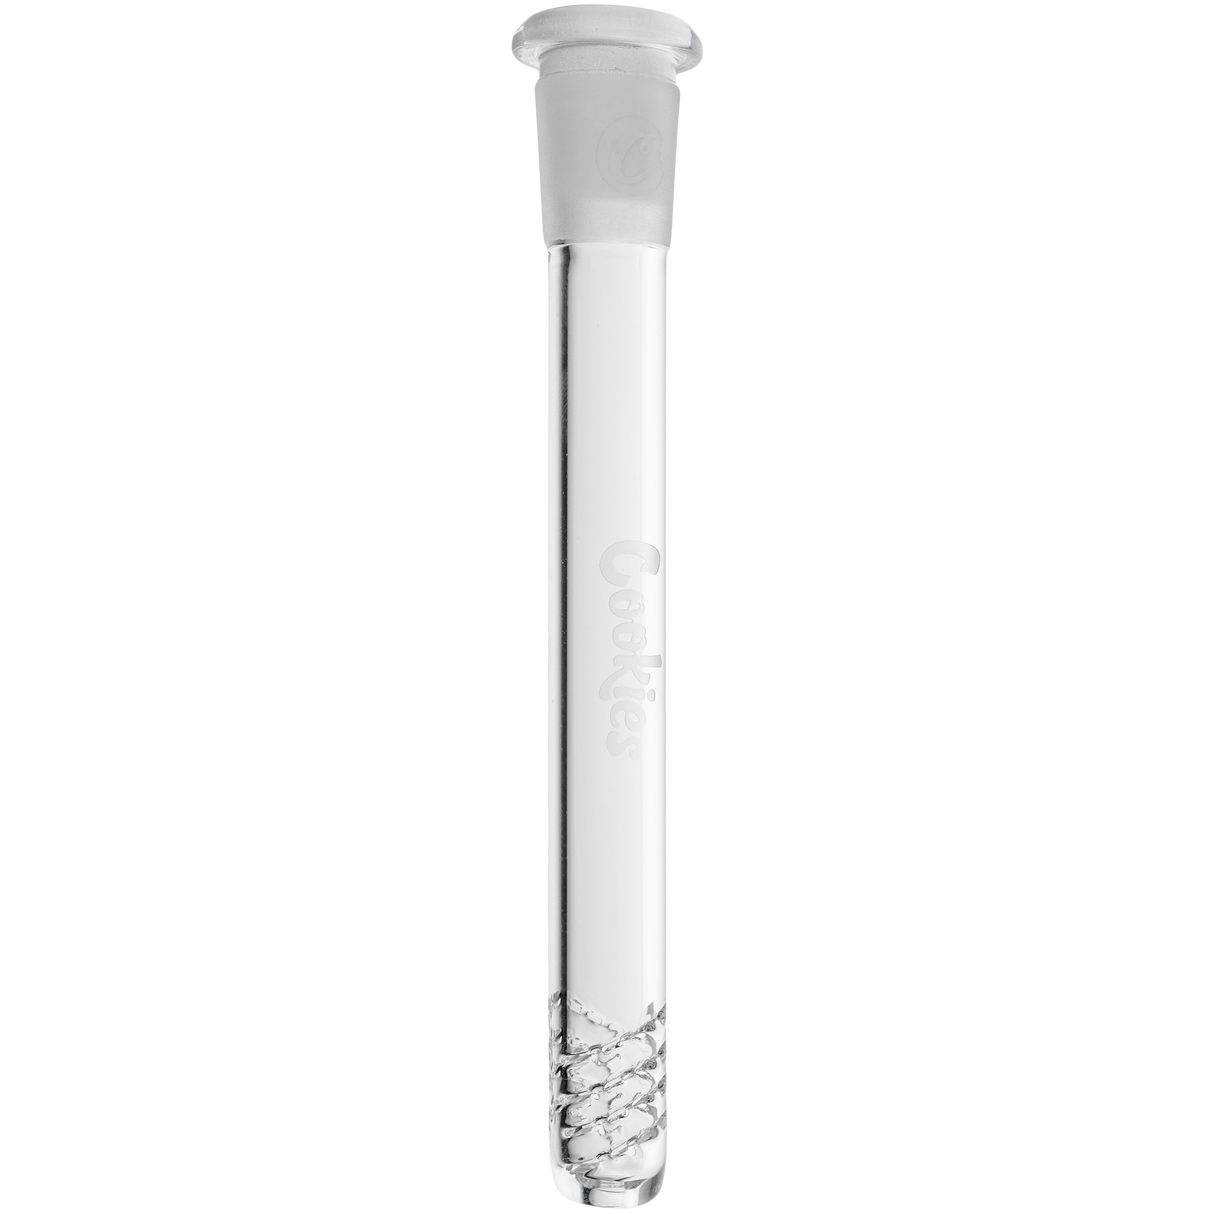 Cookies Twist Downstem 5" Borosilicate Glass for Bongs, Front View on White Background